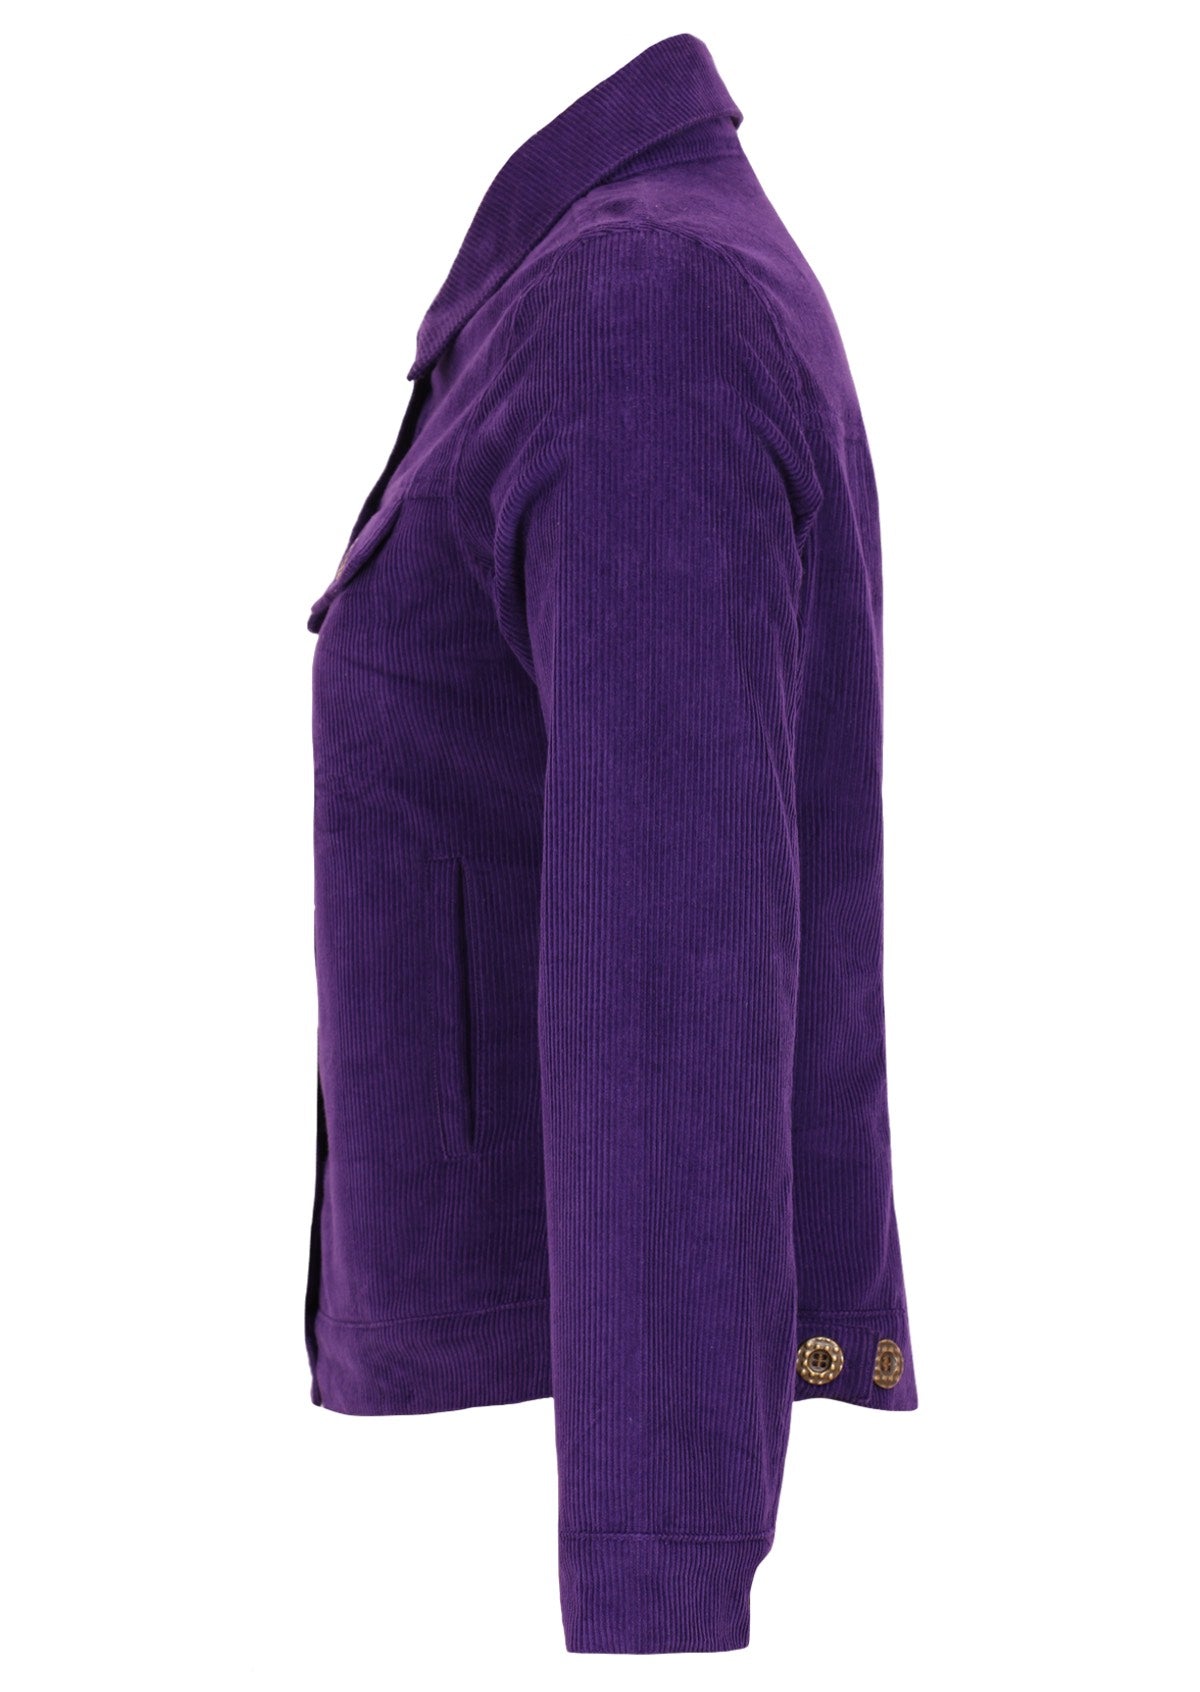 Purple corduroy jacket with four functional pockets. 